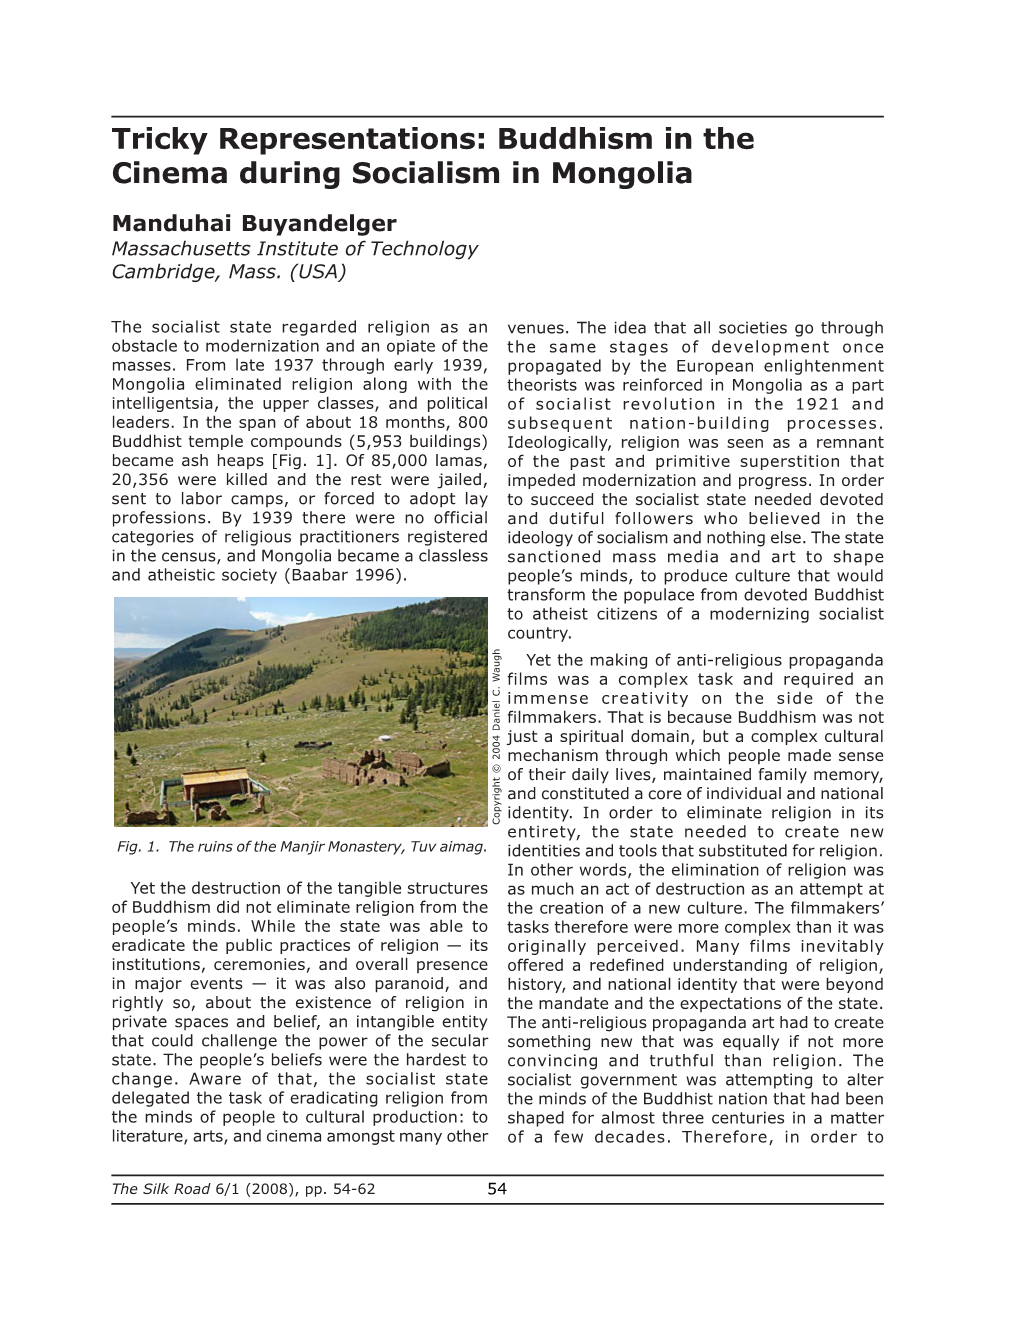 Tricky Representations: Buddhism in the Cinema During Socialism in Mongolia